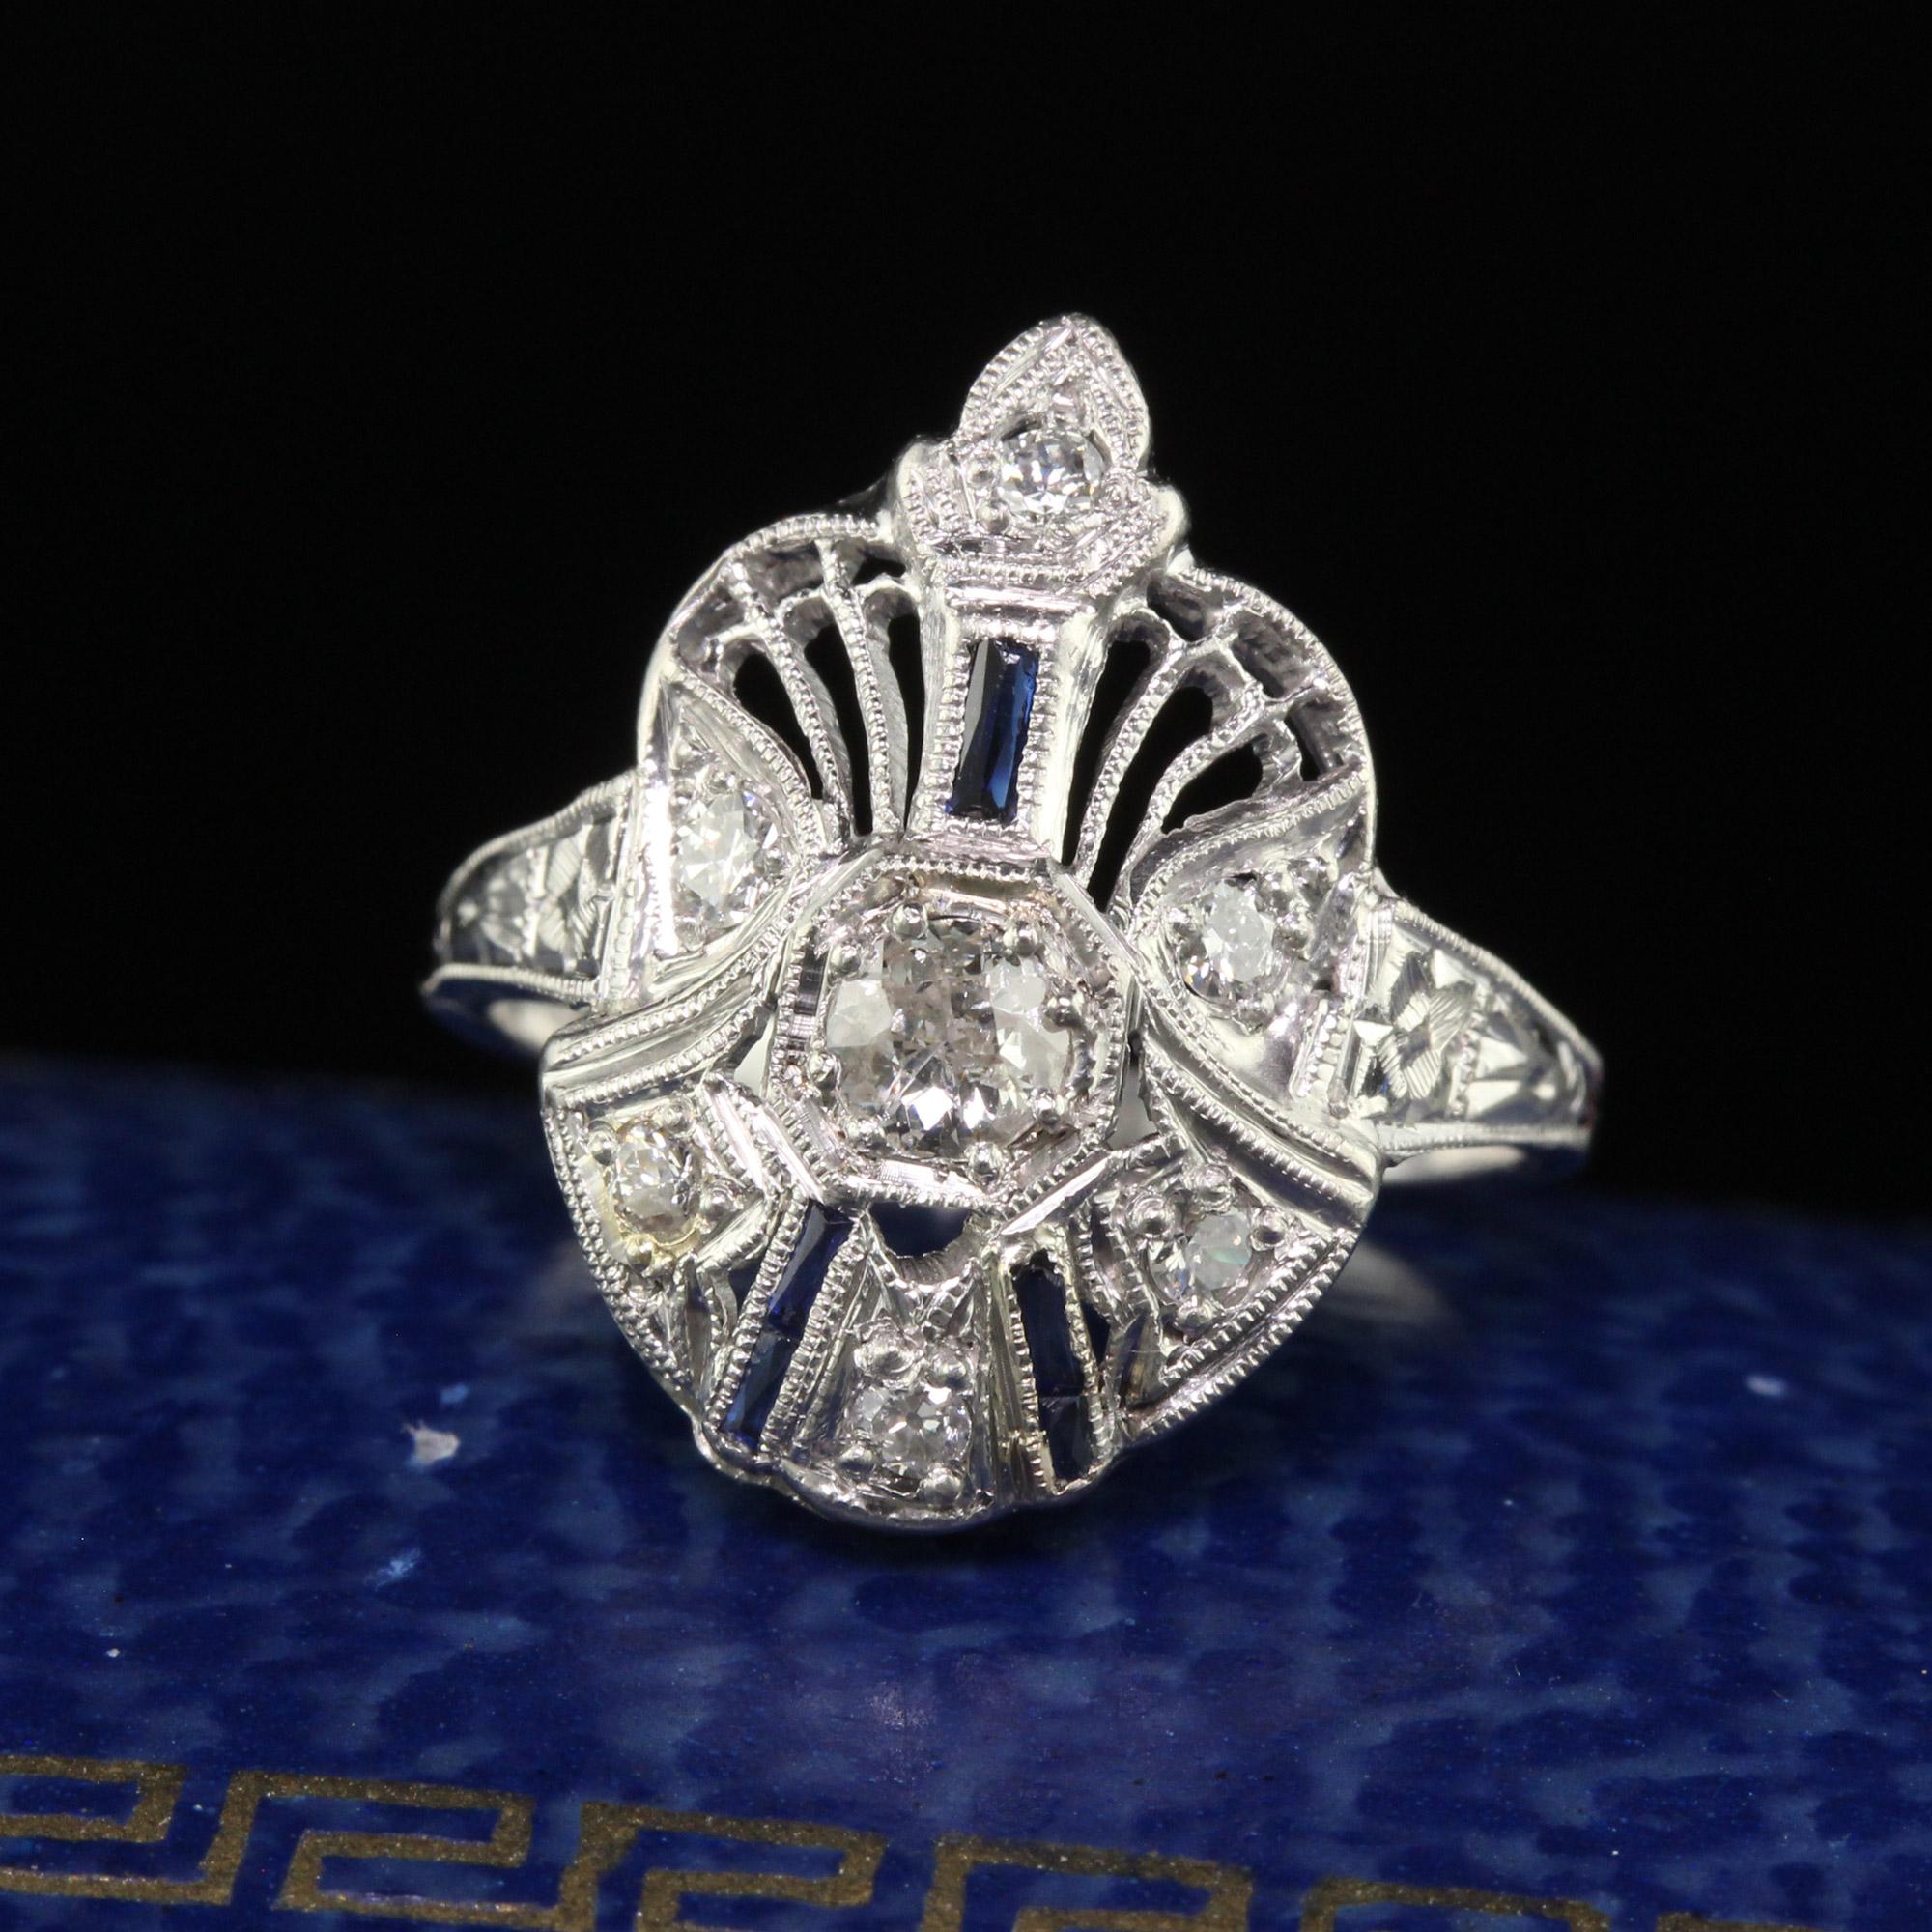 Beautiful Antique Art Deco Platinum Old European Cut Diamond and Sapphire Cocktail Ring. This gorgeous Art Deco cocktail ring is crafted in platinum. The center holds an old European cut diamond and has old cut diamonds and sapphire accents around